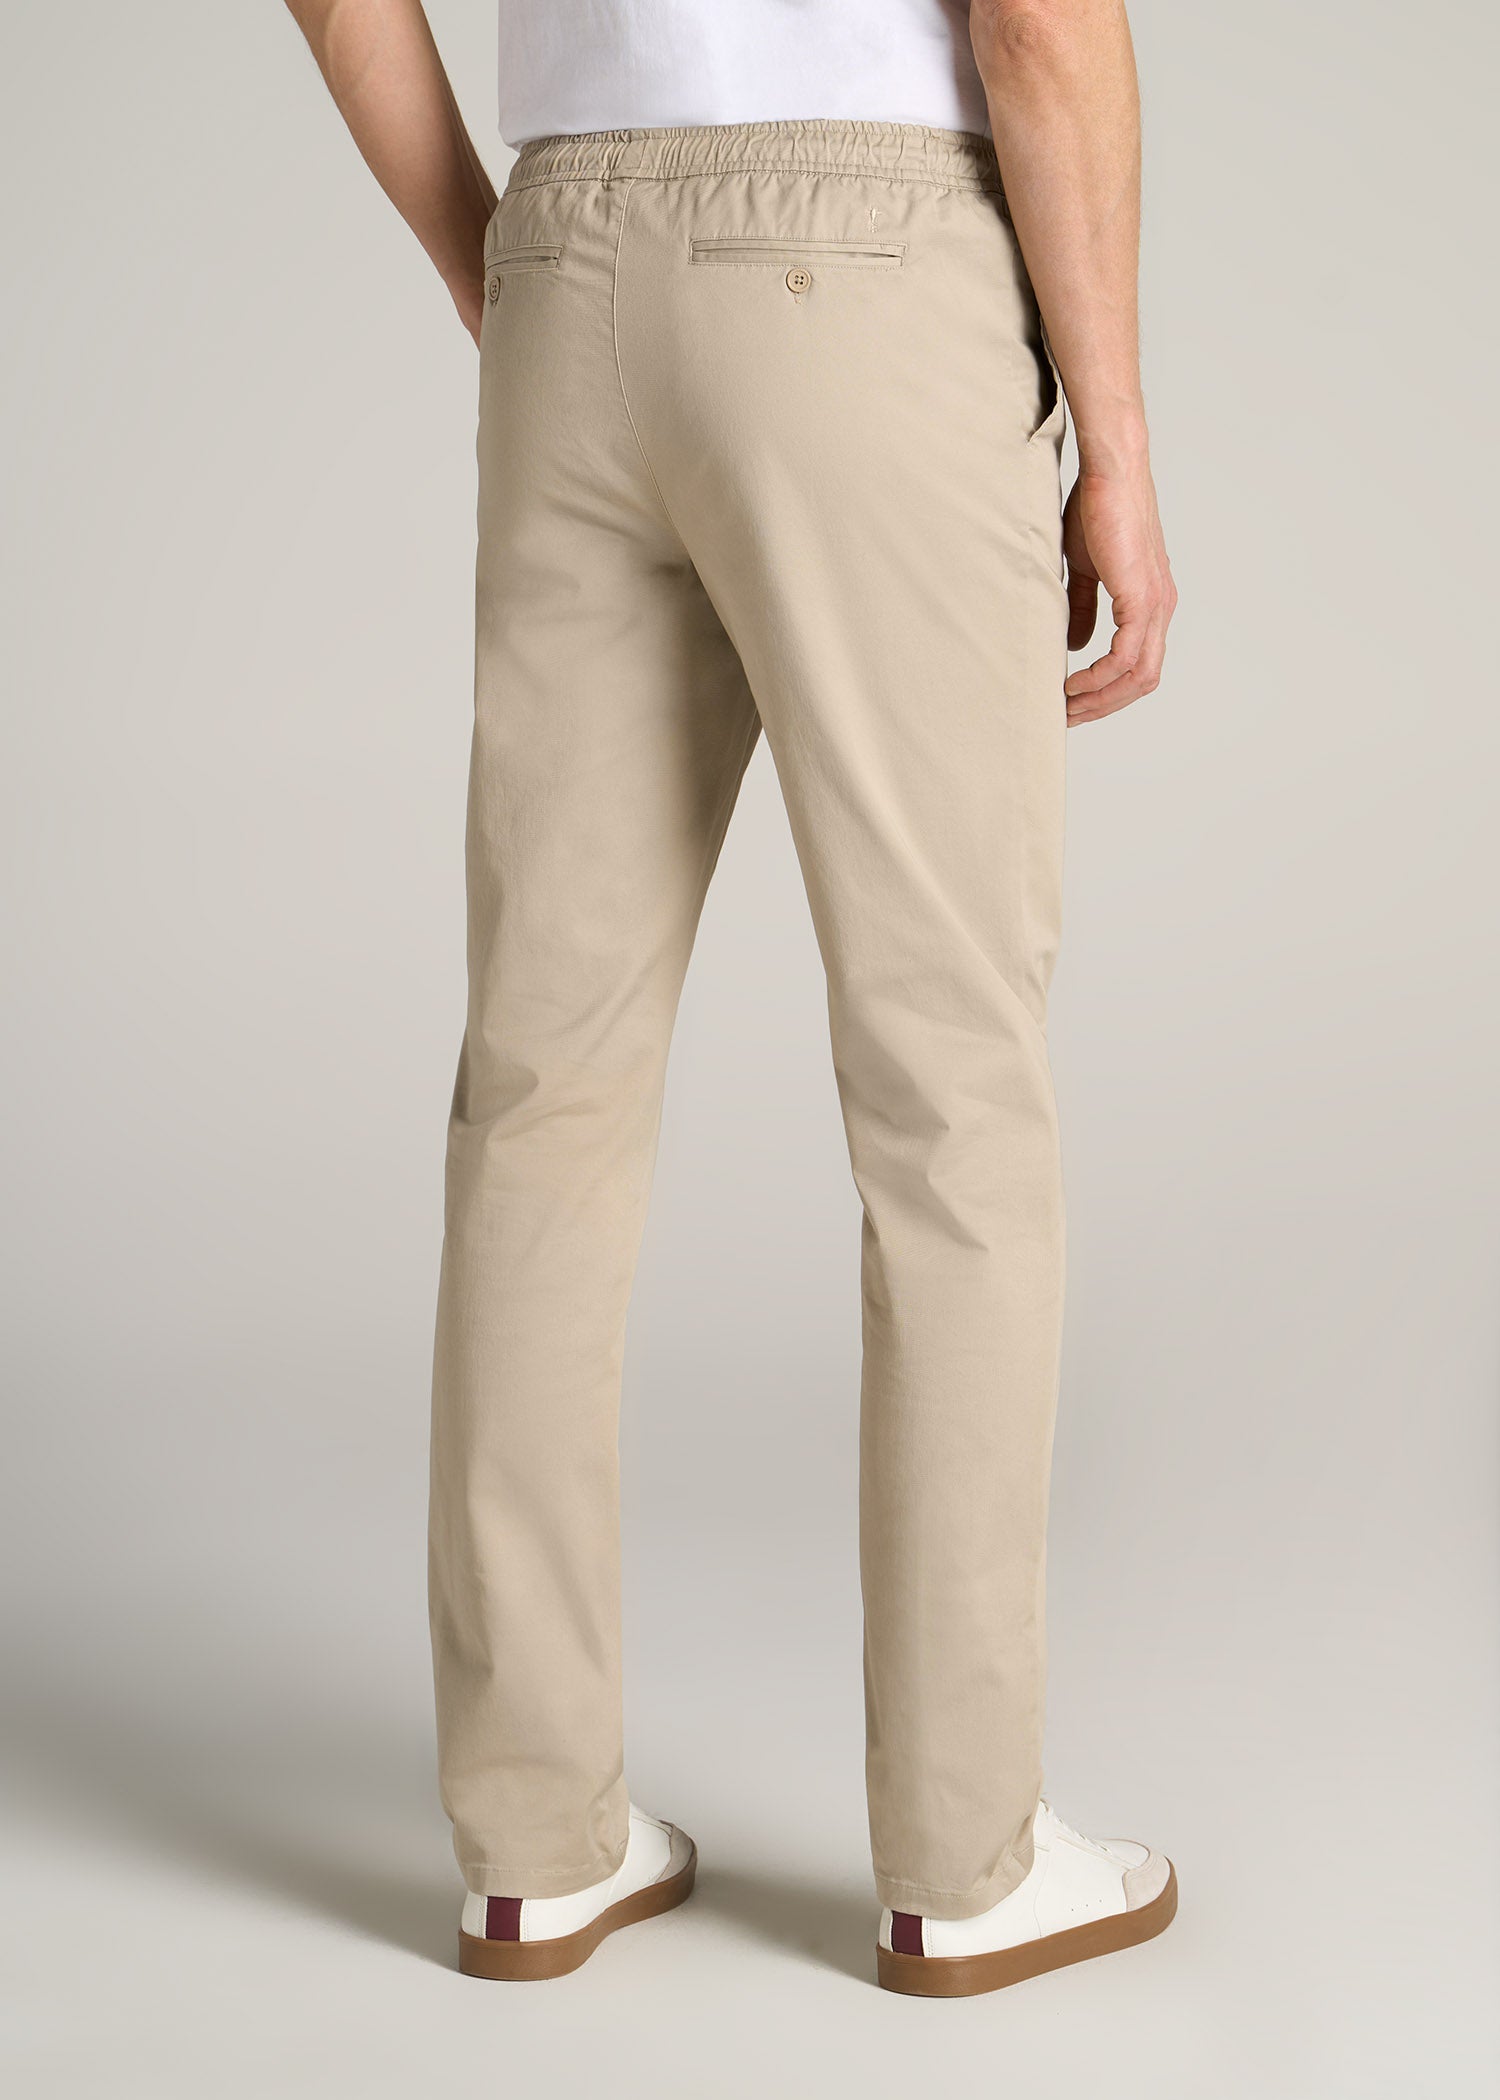 Stretch Pull On TAPERED-FIT Deck Pants For Tall Men in Light Khaki